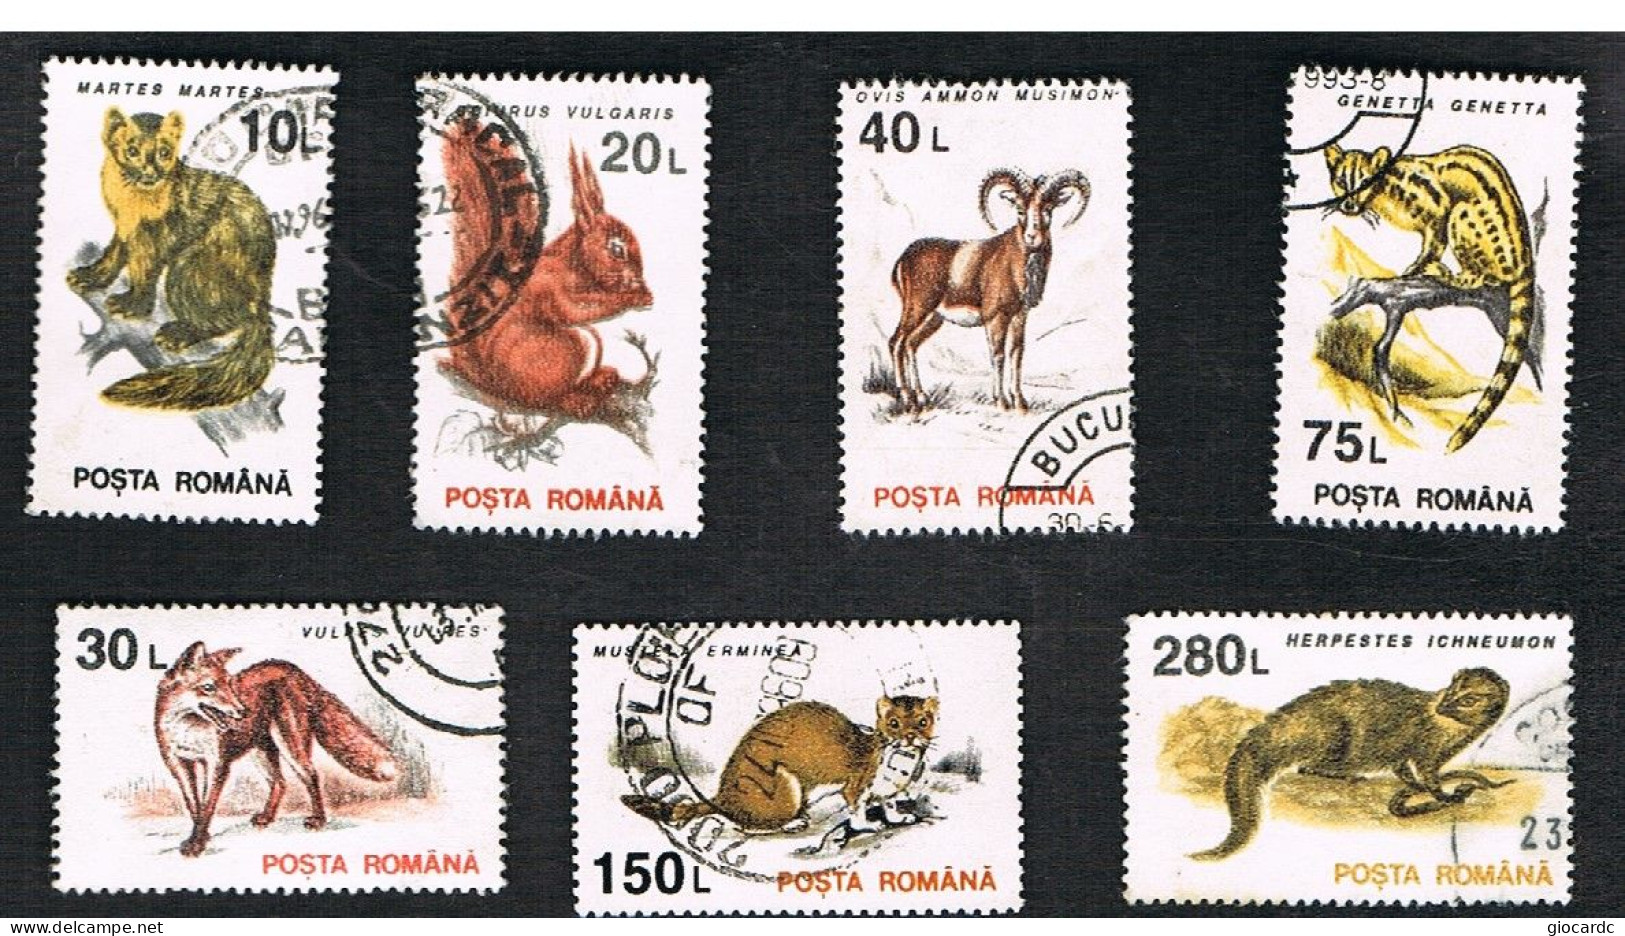 ROMANIA - SG 5533.5542  - 1995  CURRENT SERIE: ANIMALS   (7 STAMPS OF THE SET  ON WHITE PAPER)  - USED ° - Gebruikt